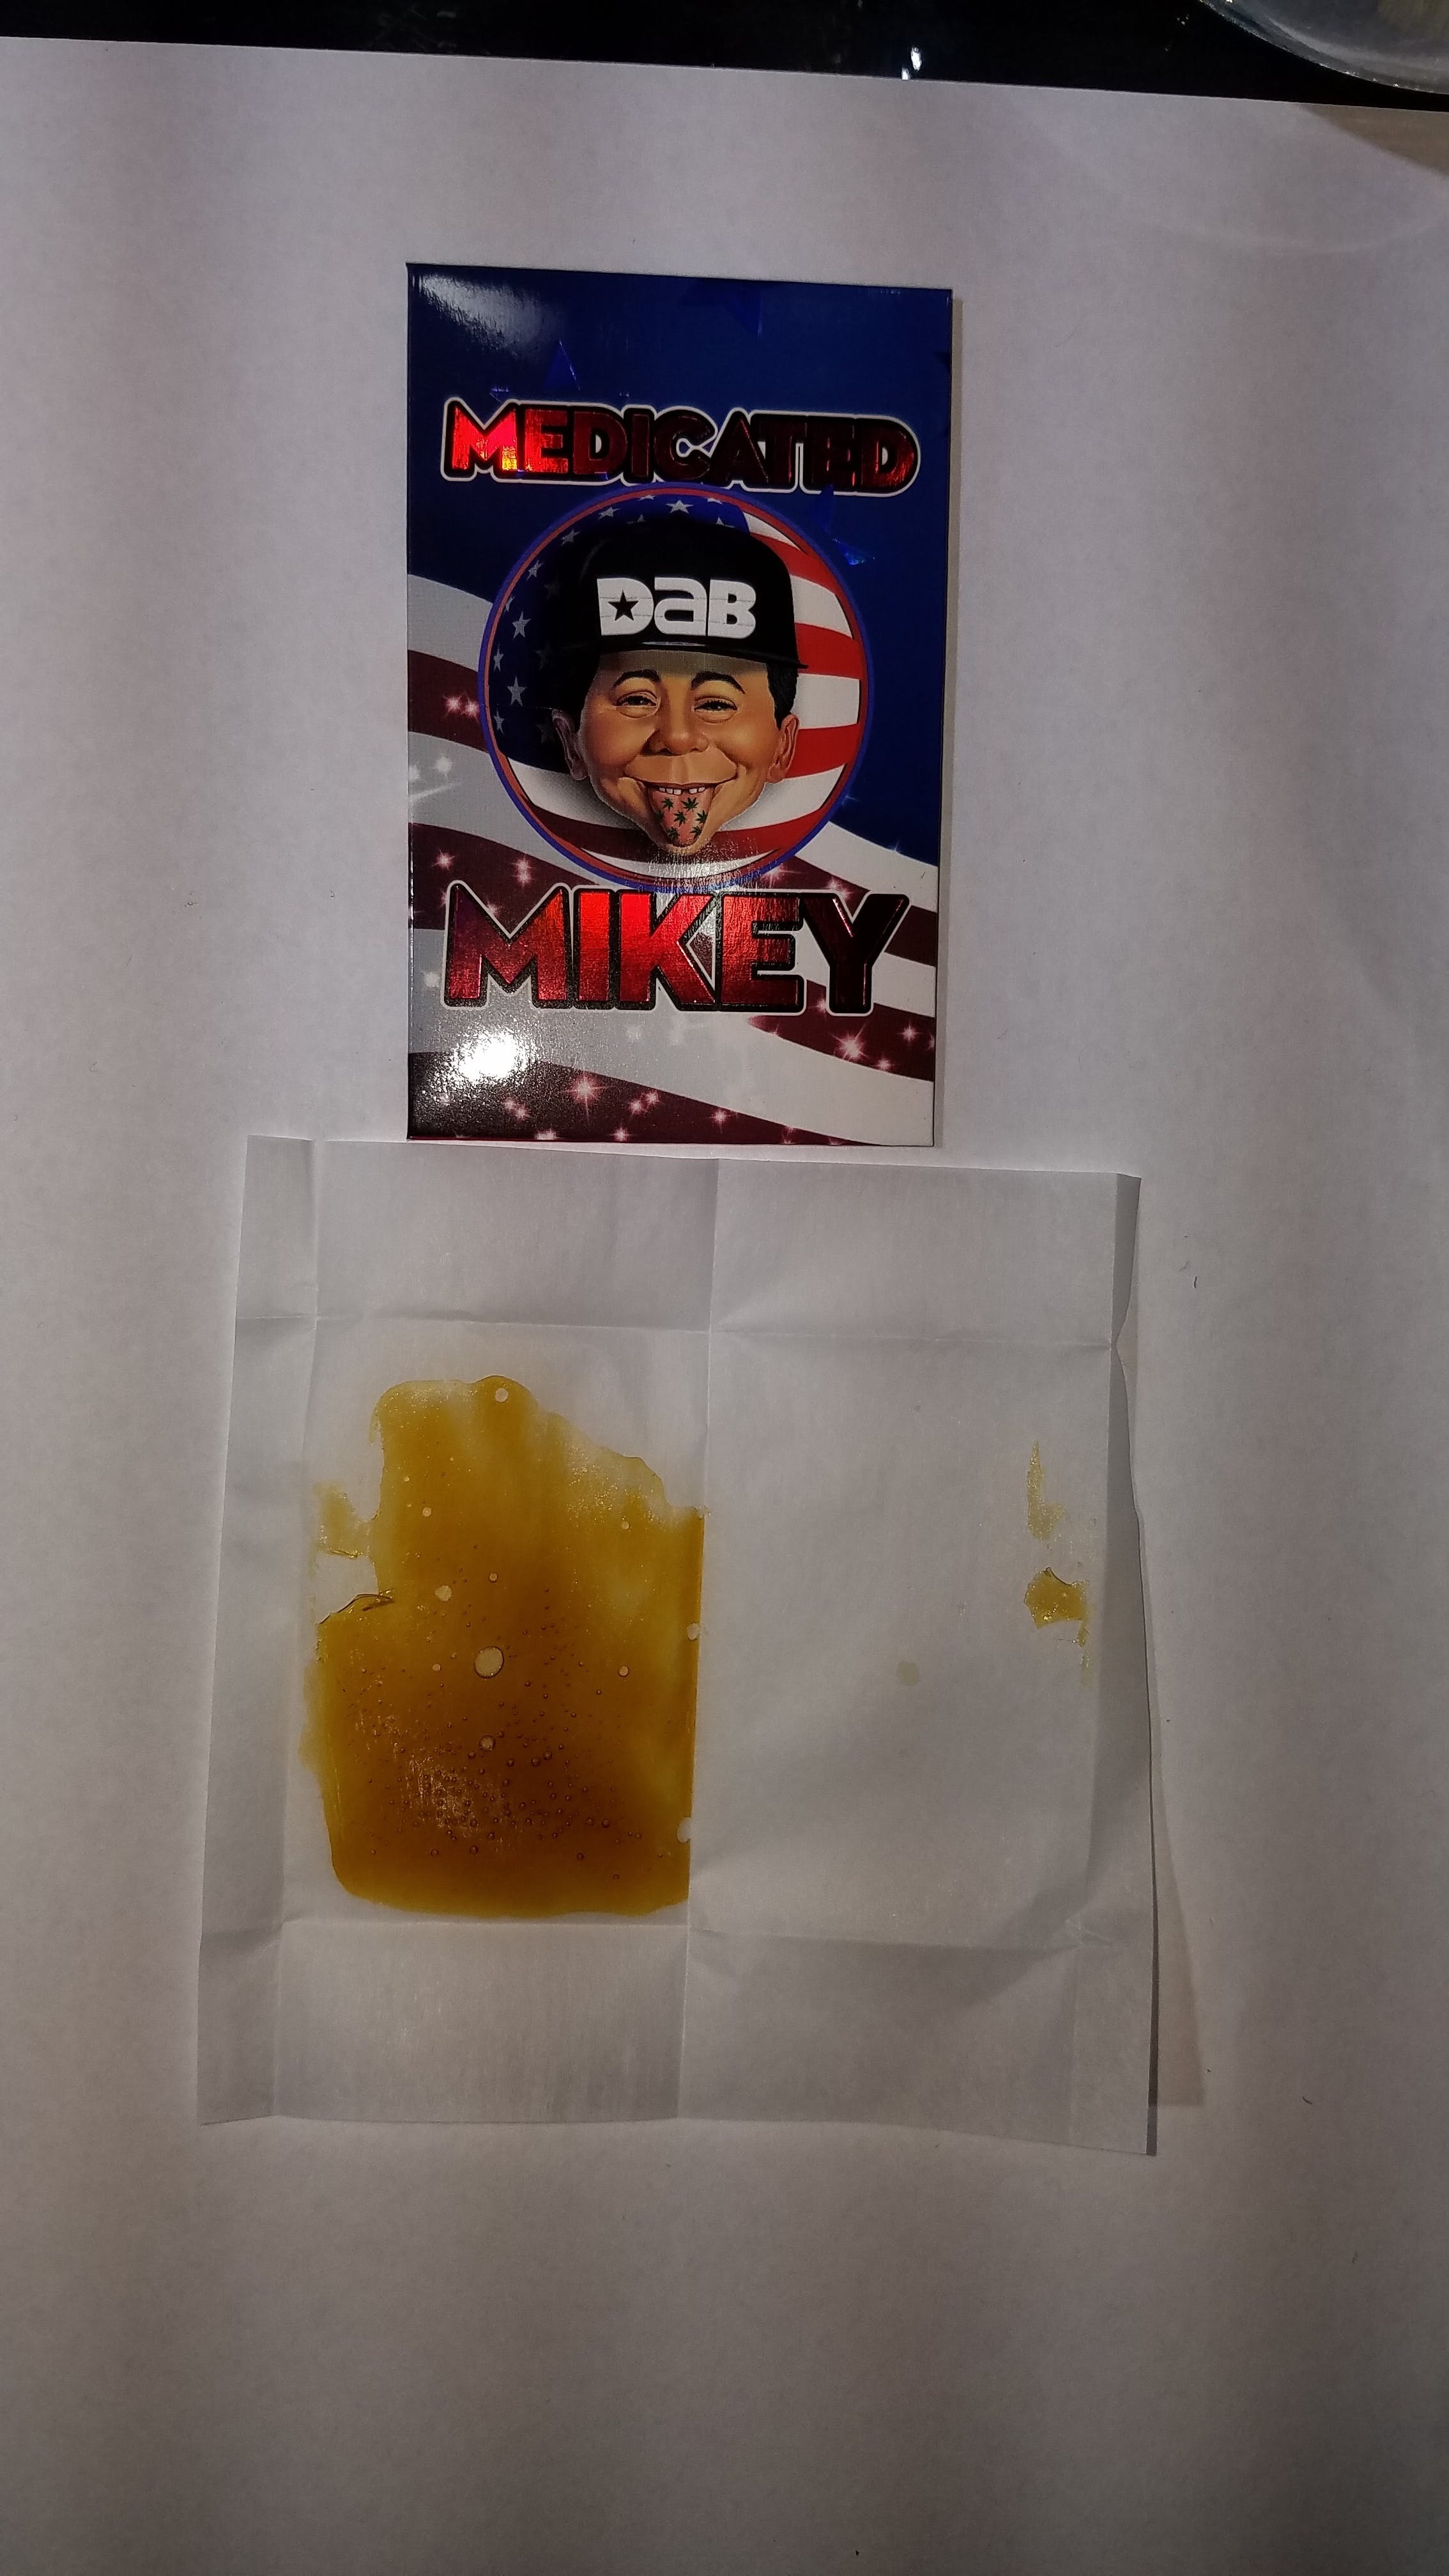 wax-medicated-mikey-shatter-1g